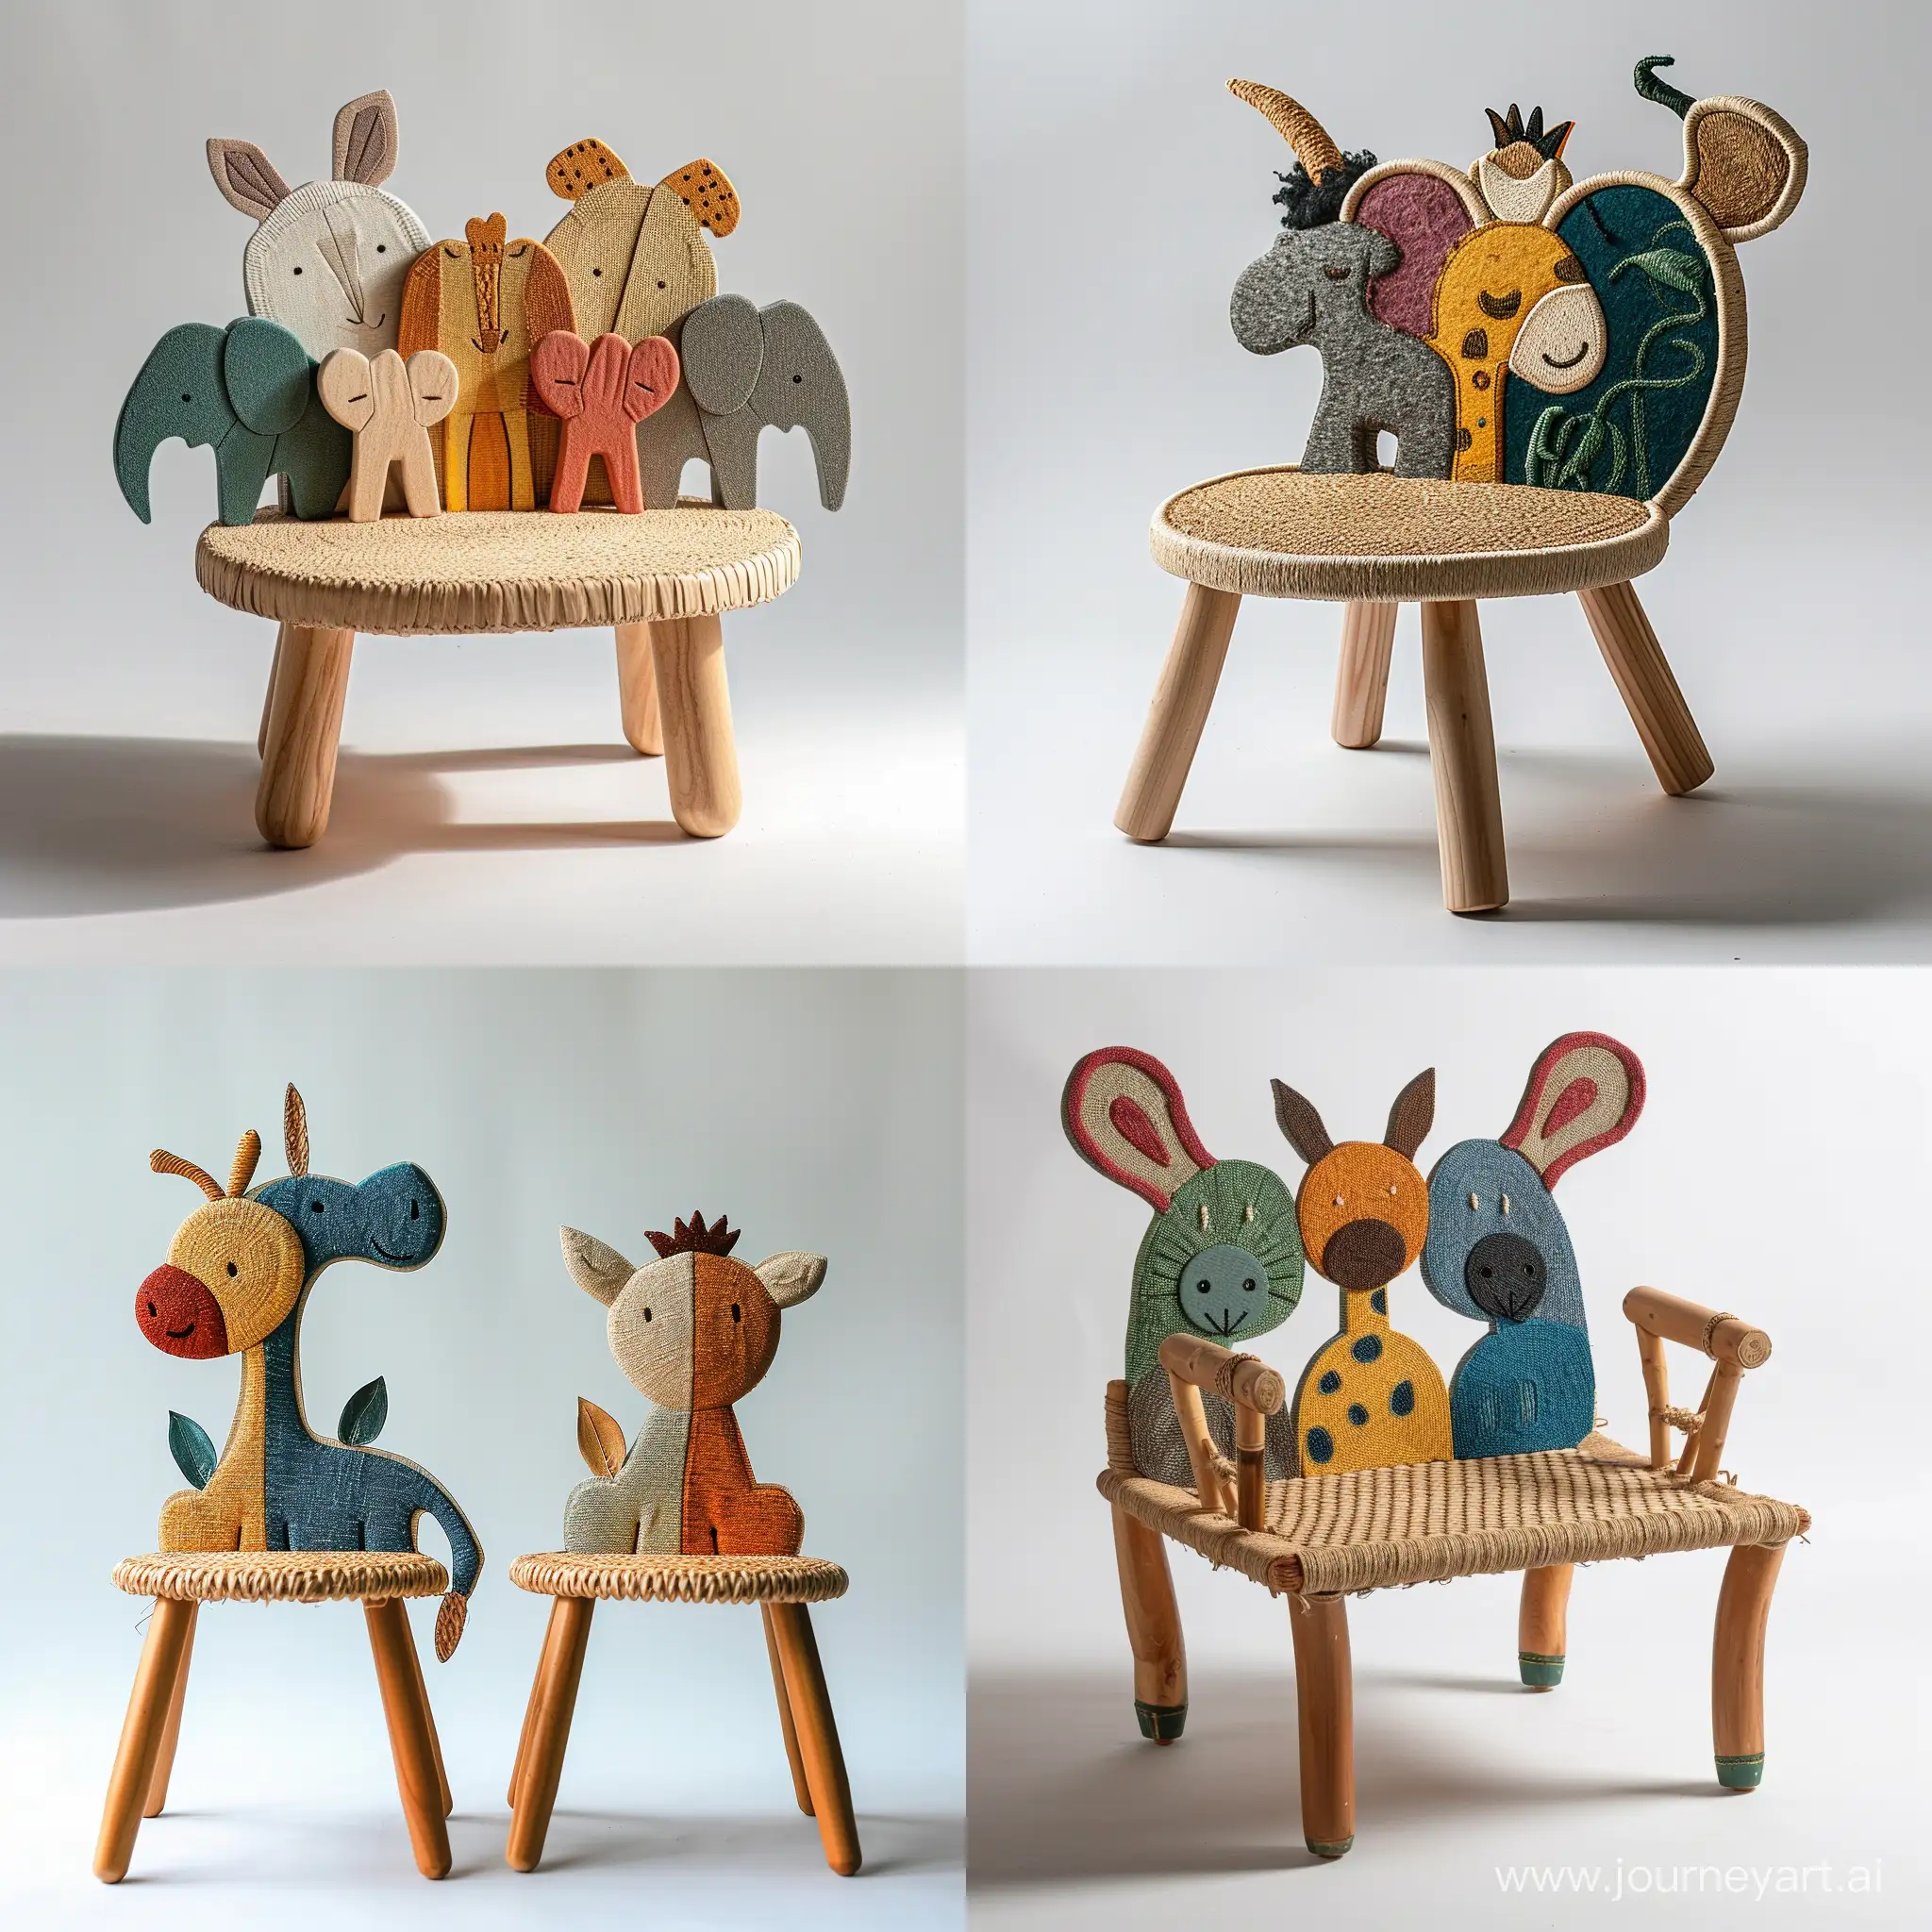 imagine an image of a cute sturdy children’s collection chair inspired by beautiful perfect safari animals, with backrests shaped like different safari animals. Use recycled wood for the frame and woven plant fibers for seating areas, depicted in colors representative of the chosen animals. The seat should stand approximately 30cm tall, built to educate about wildlife and ensure durability.realistic style